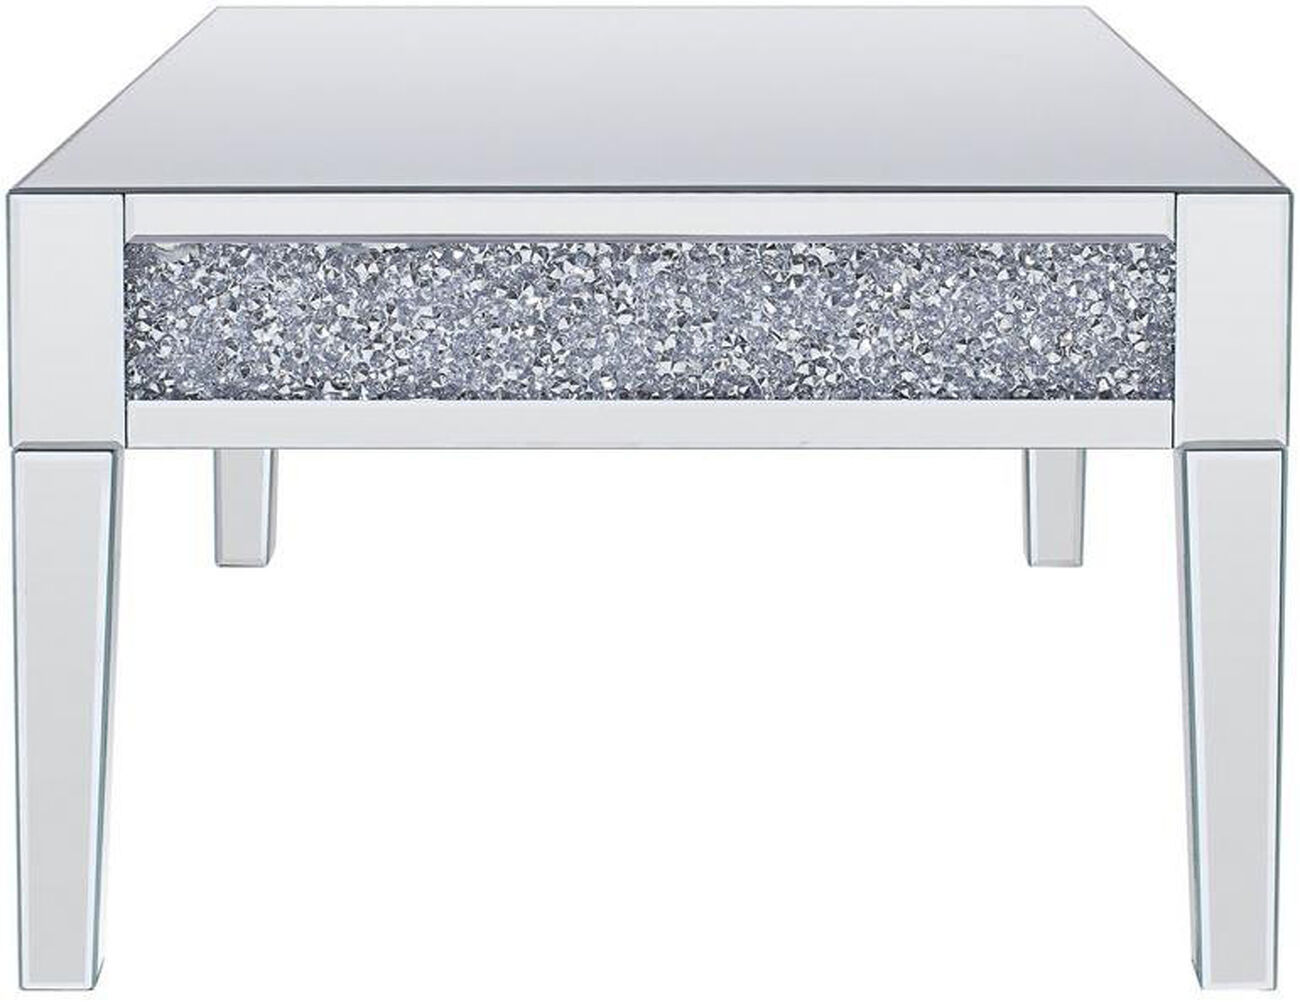 Wood and Mirror Coffee Table with Faux Crystals Inlay, Clear